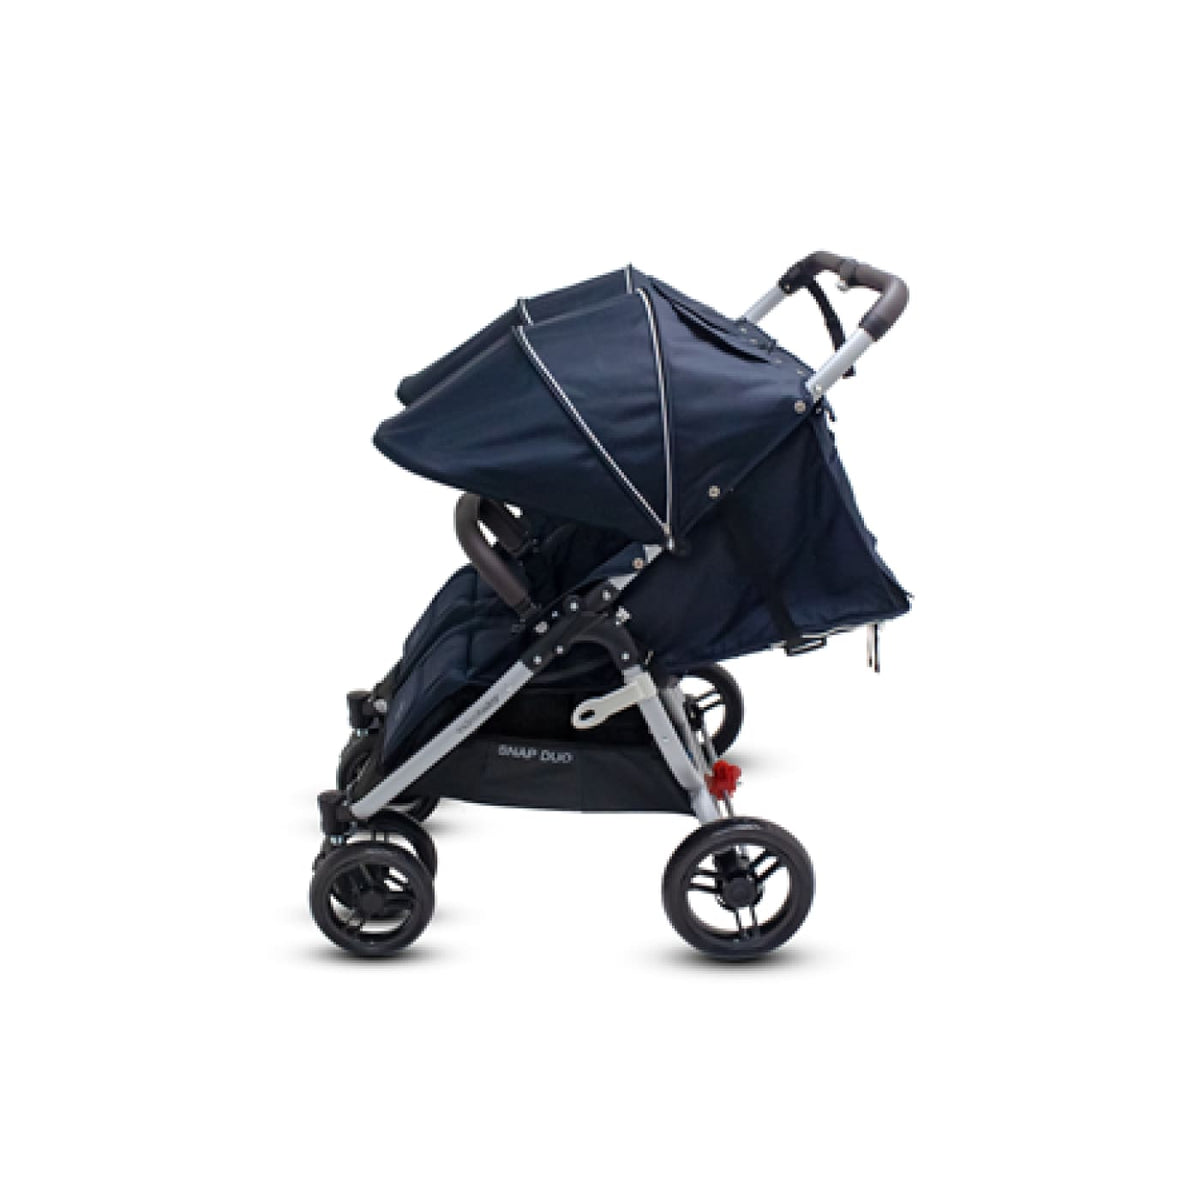 Valco Baby Snap Duo Stroller - Navy - Navy - PRAMS &amp; STROLLERS - TWIN/TANDEM TSC